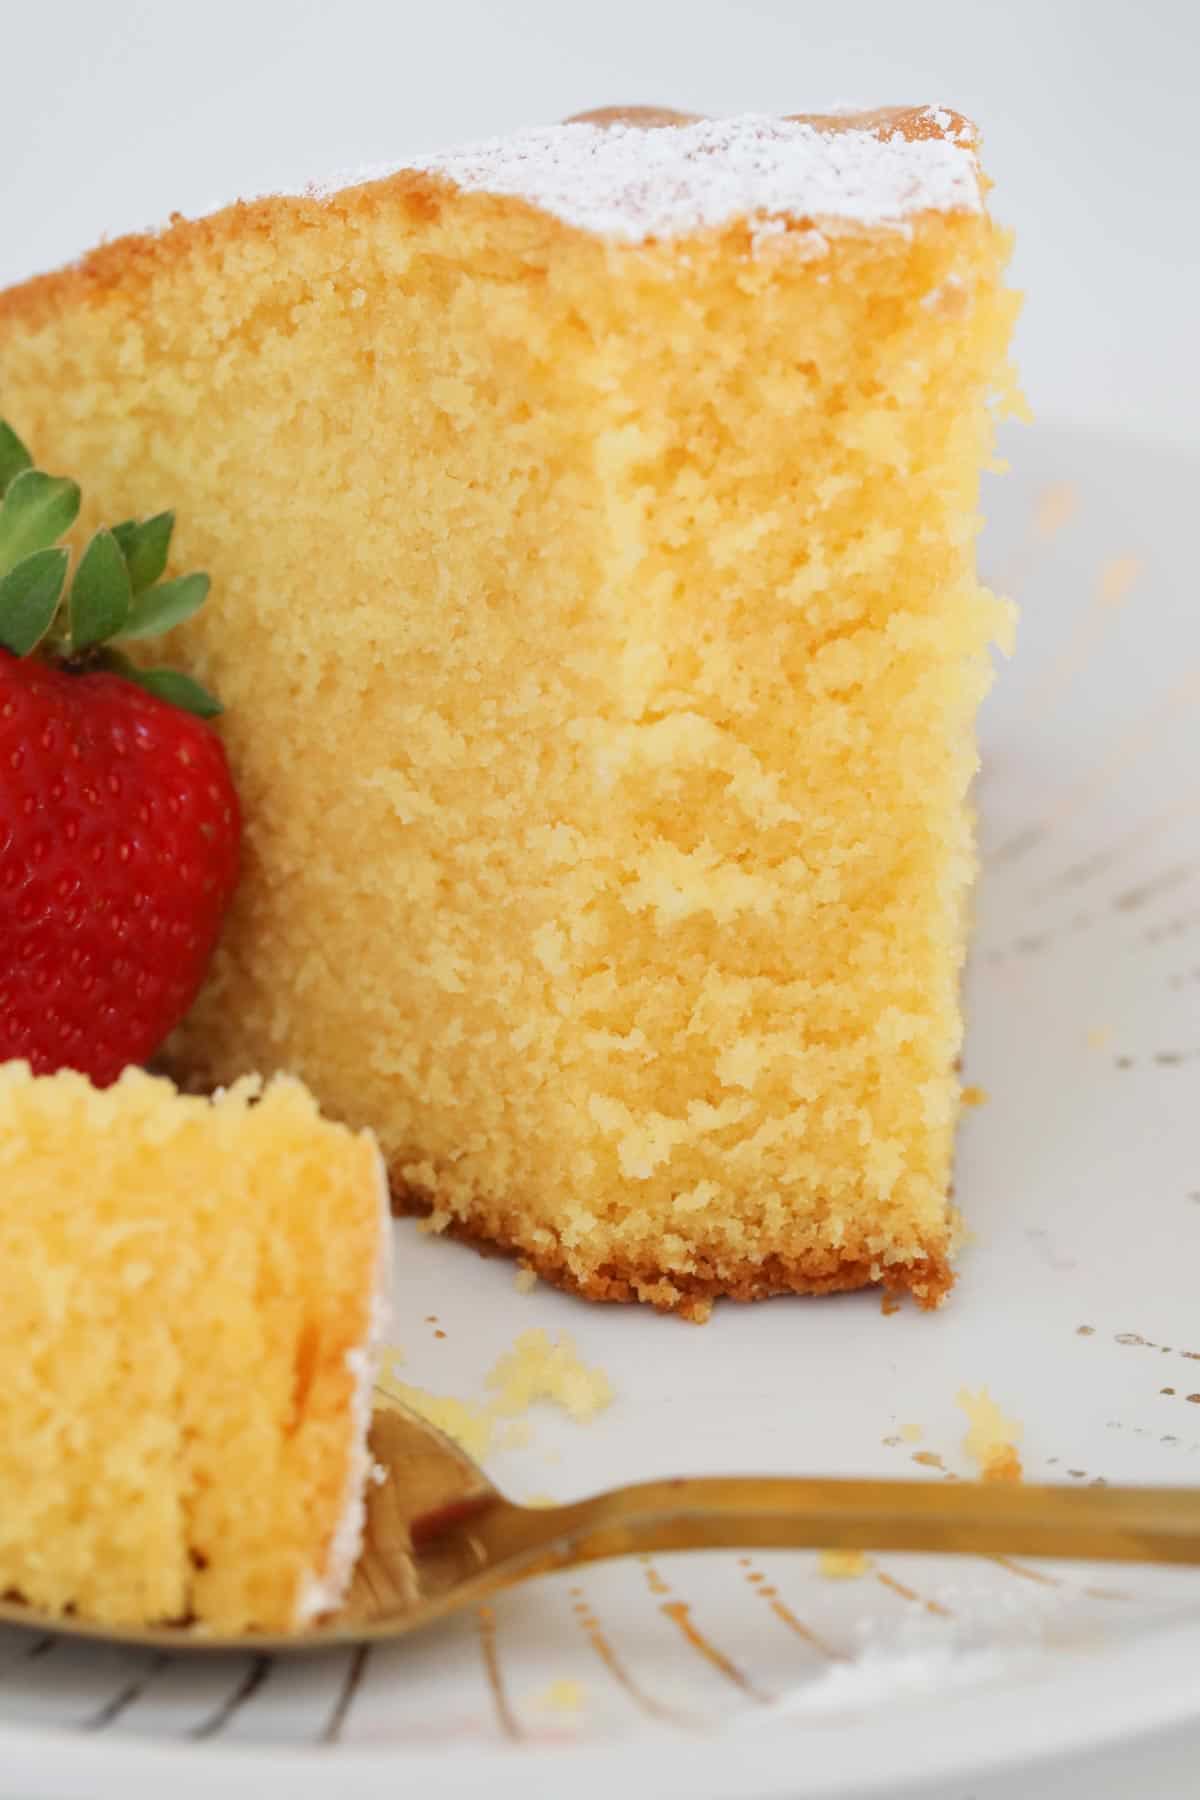 A slice of custard cake on a plate with a mouthful on a fork.